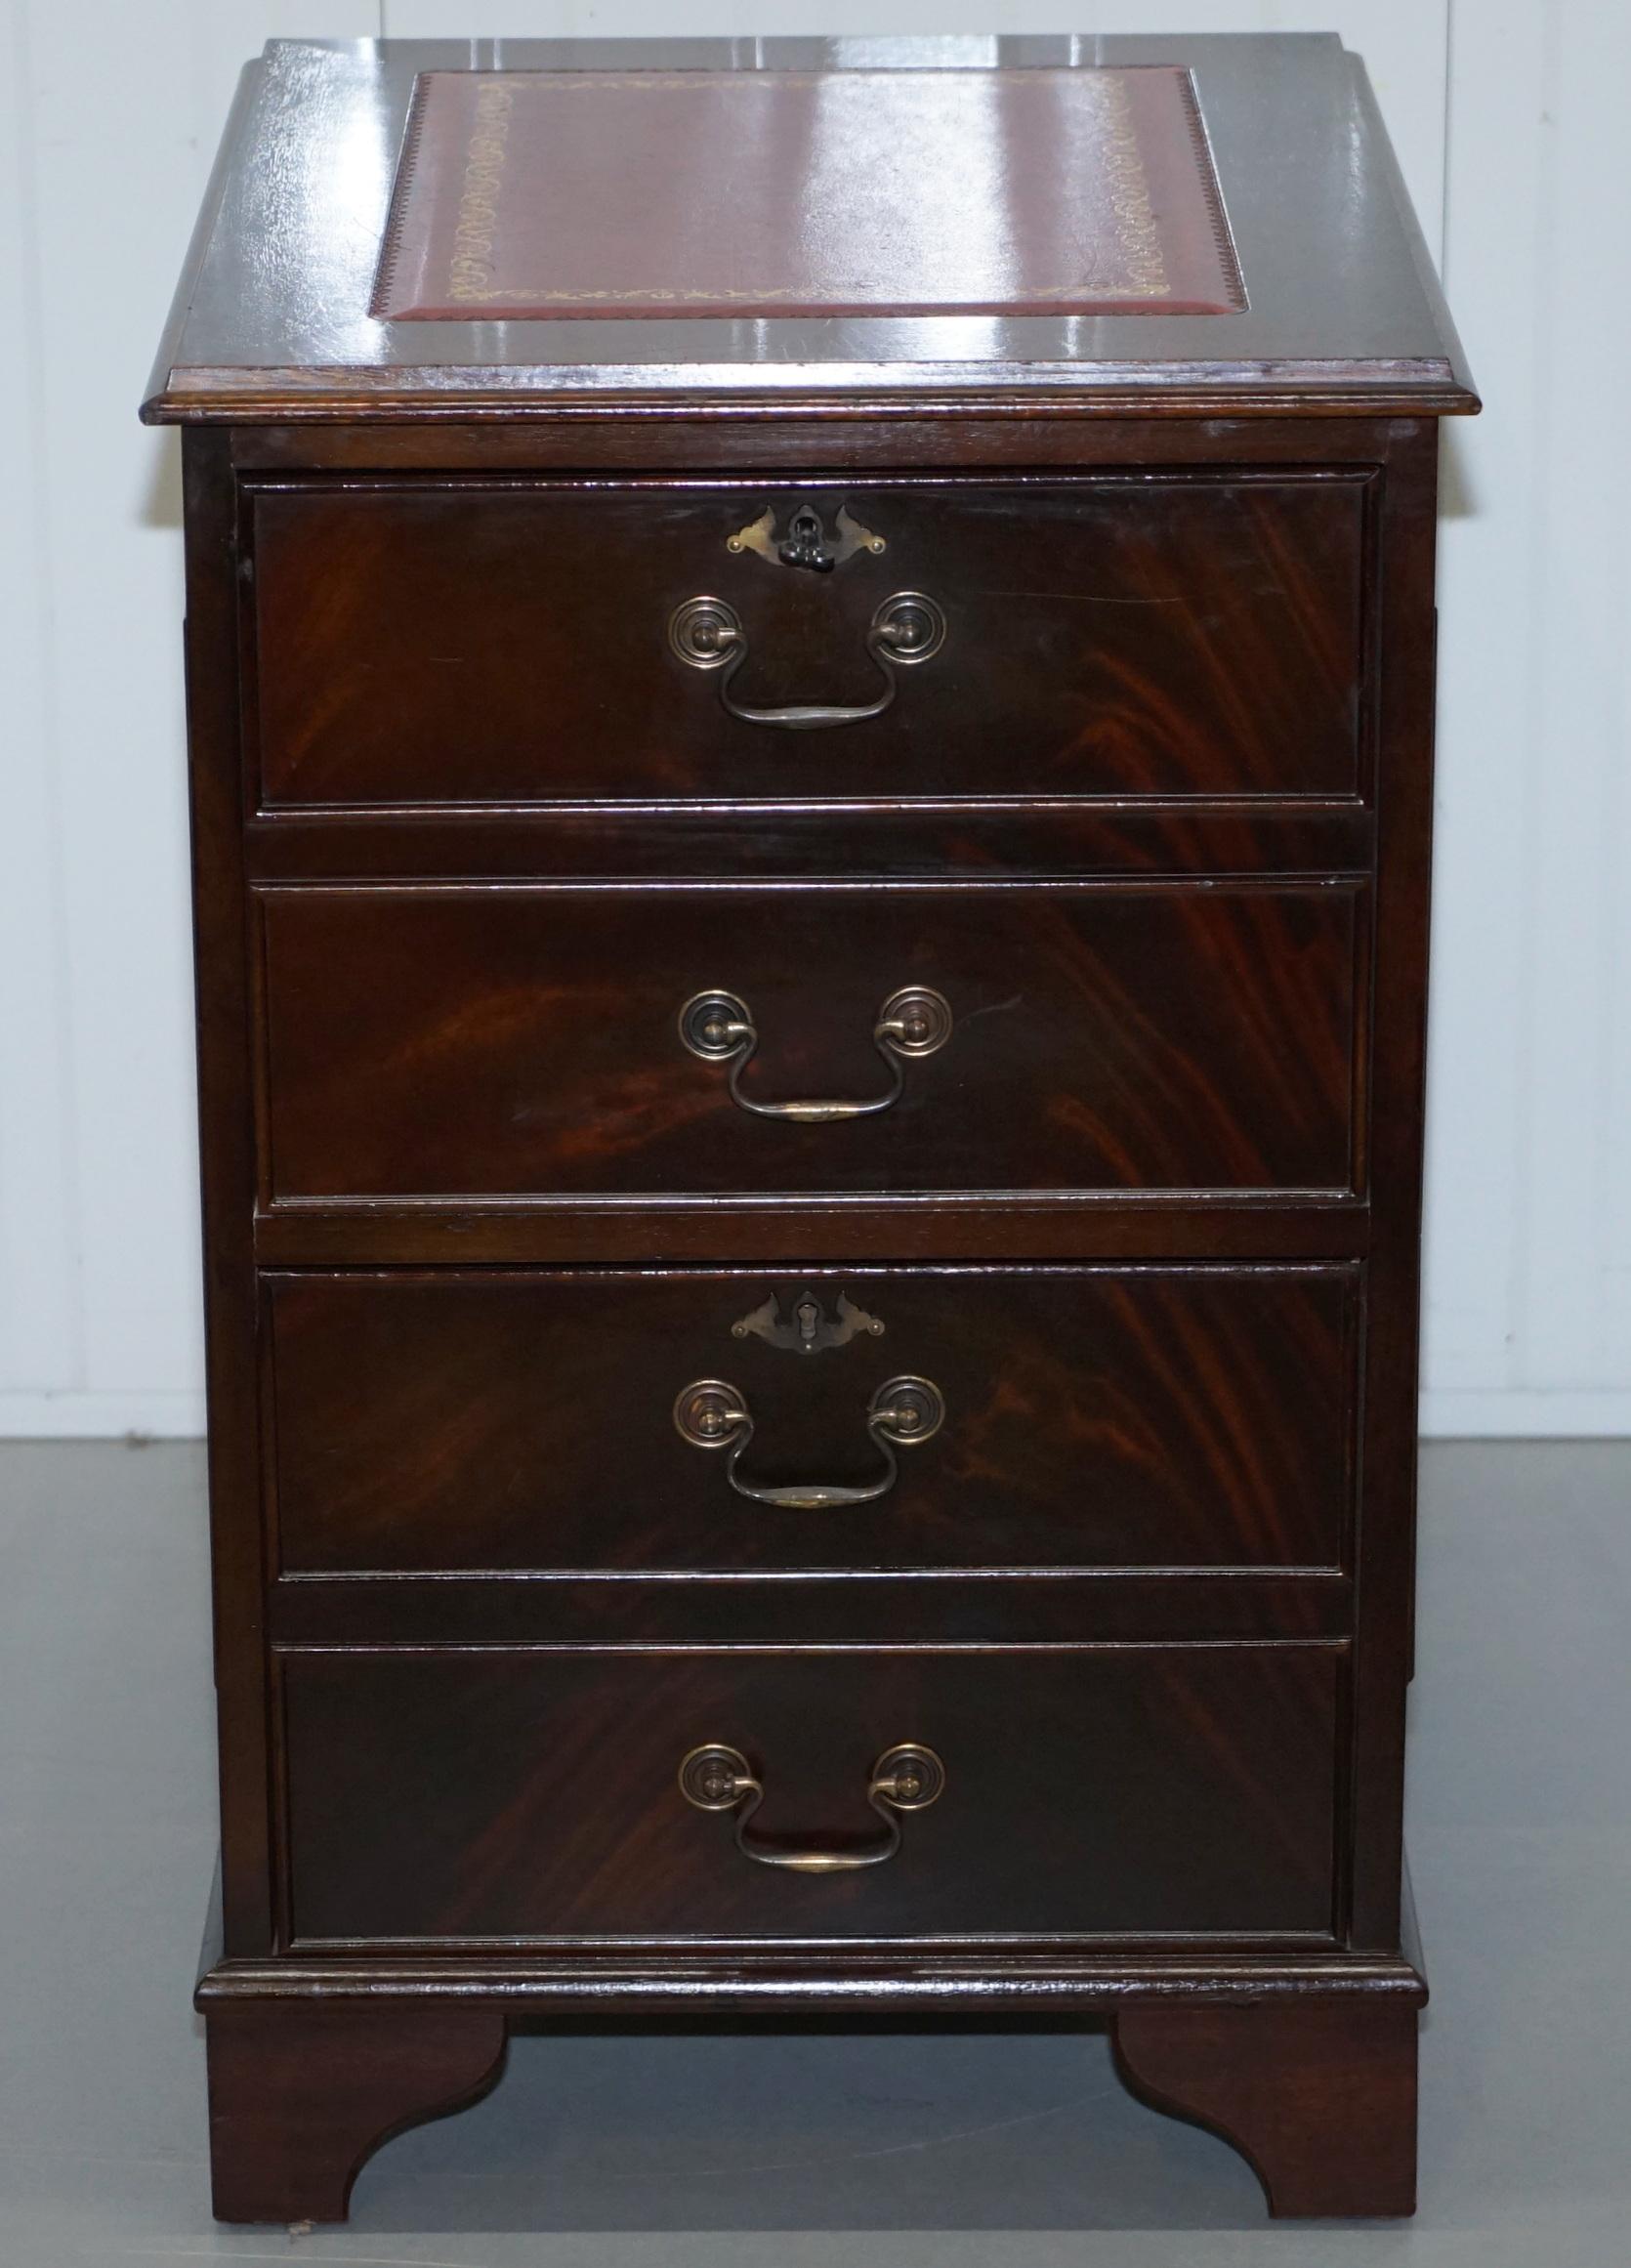 We are delighted to offer for sale this lovely Mahogany with oxblood leather writing surface filing cabinet

Please note the delivery fee listed is just a guide, it covers within the M25 only

I have the matching desk for this filing cabinet